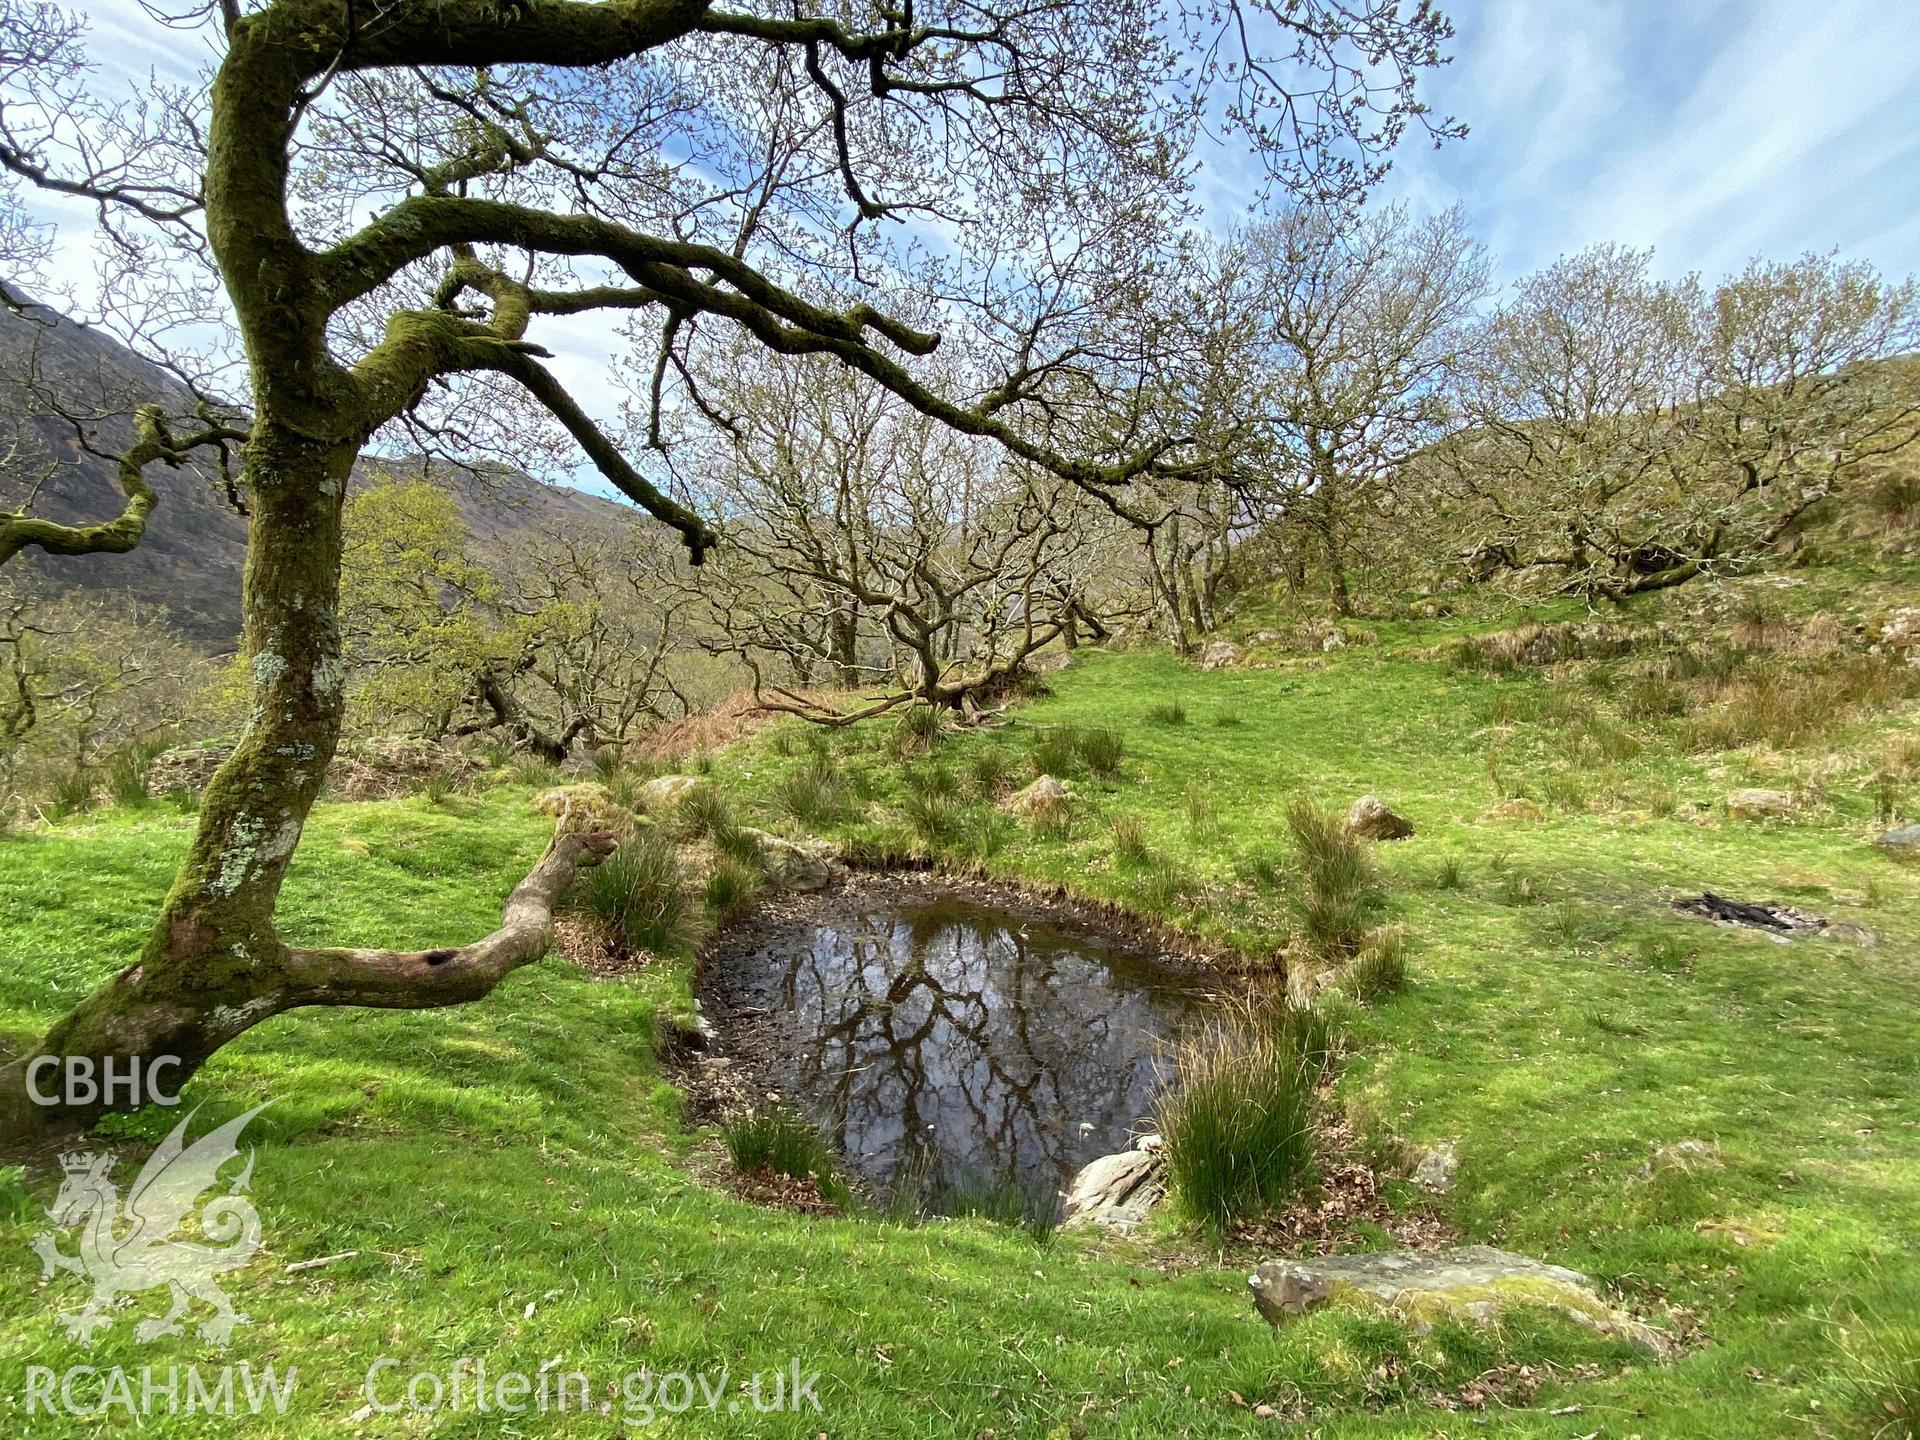 Digital colour photograph showing Dinas Emrys (pool), produced by Paul R Davis in 2021.